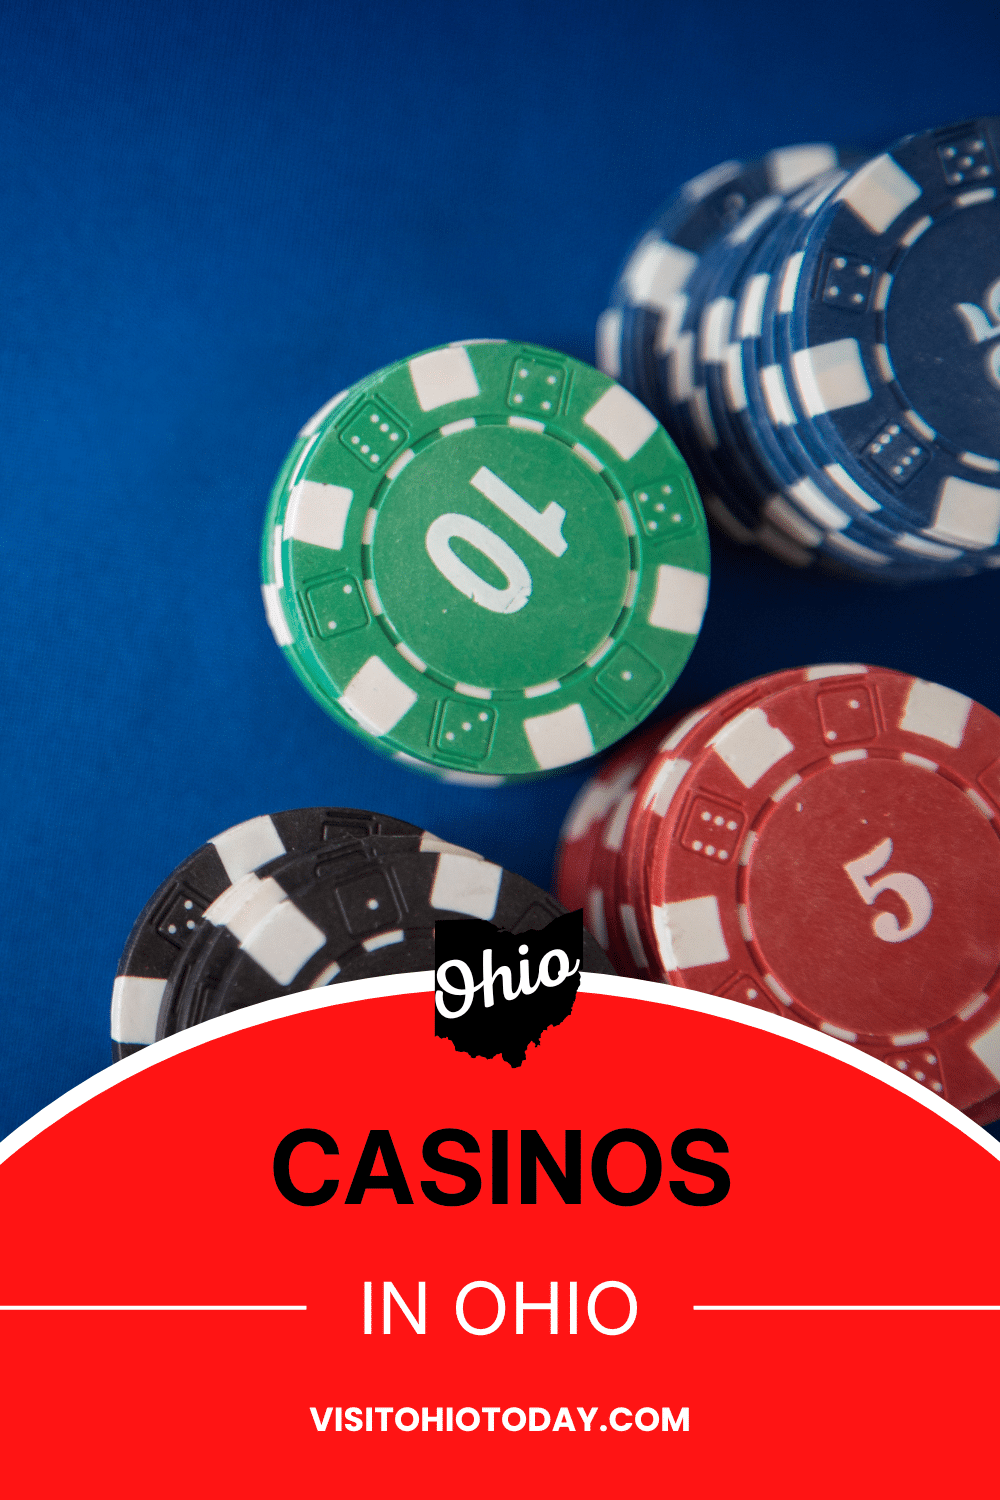 vertical image with a photo of casino chips on a blue surface. A red area at the bottom has the text Casinos in Ohio